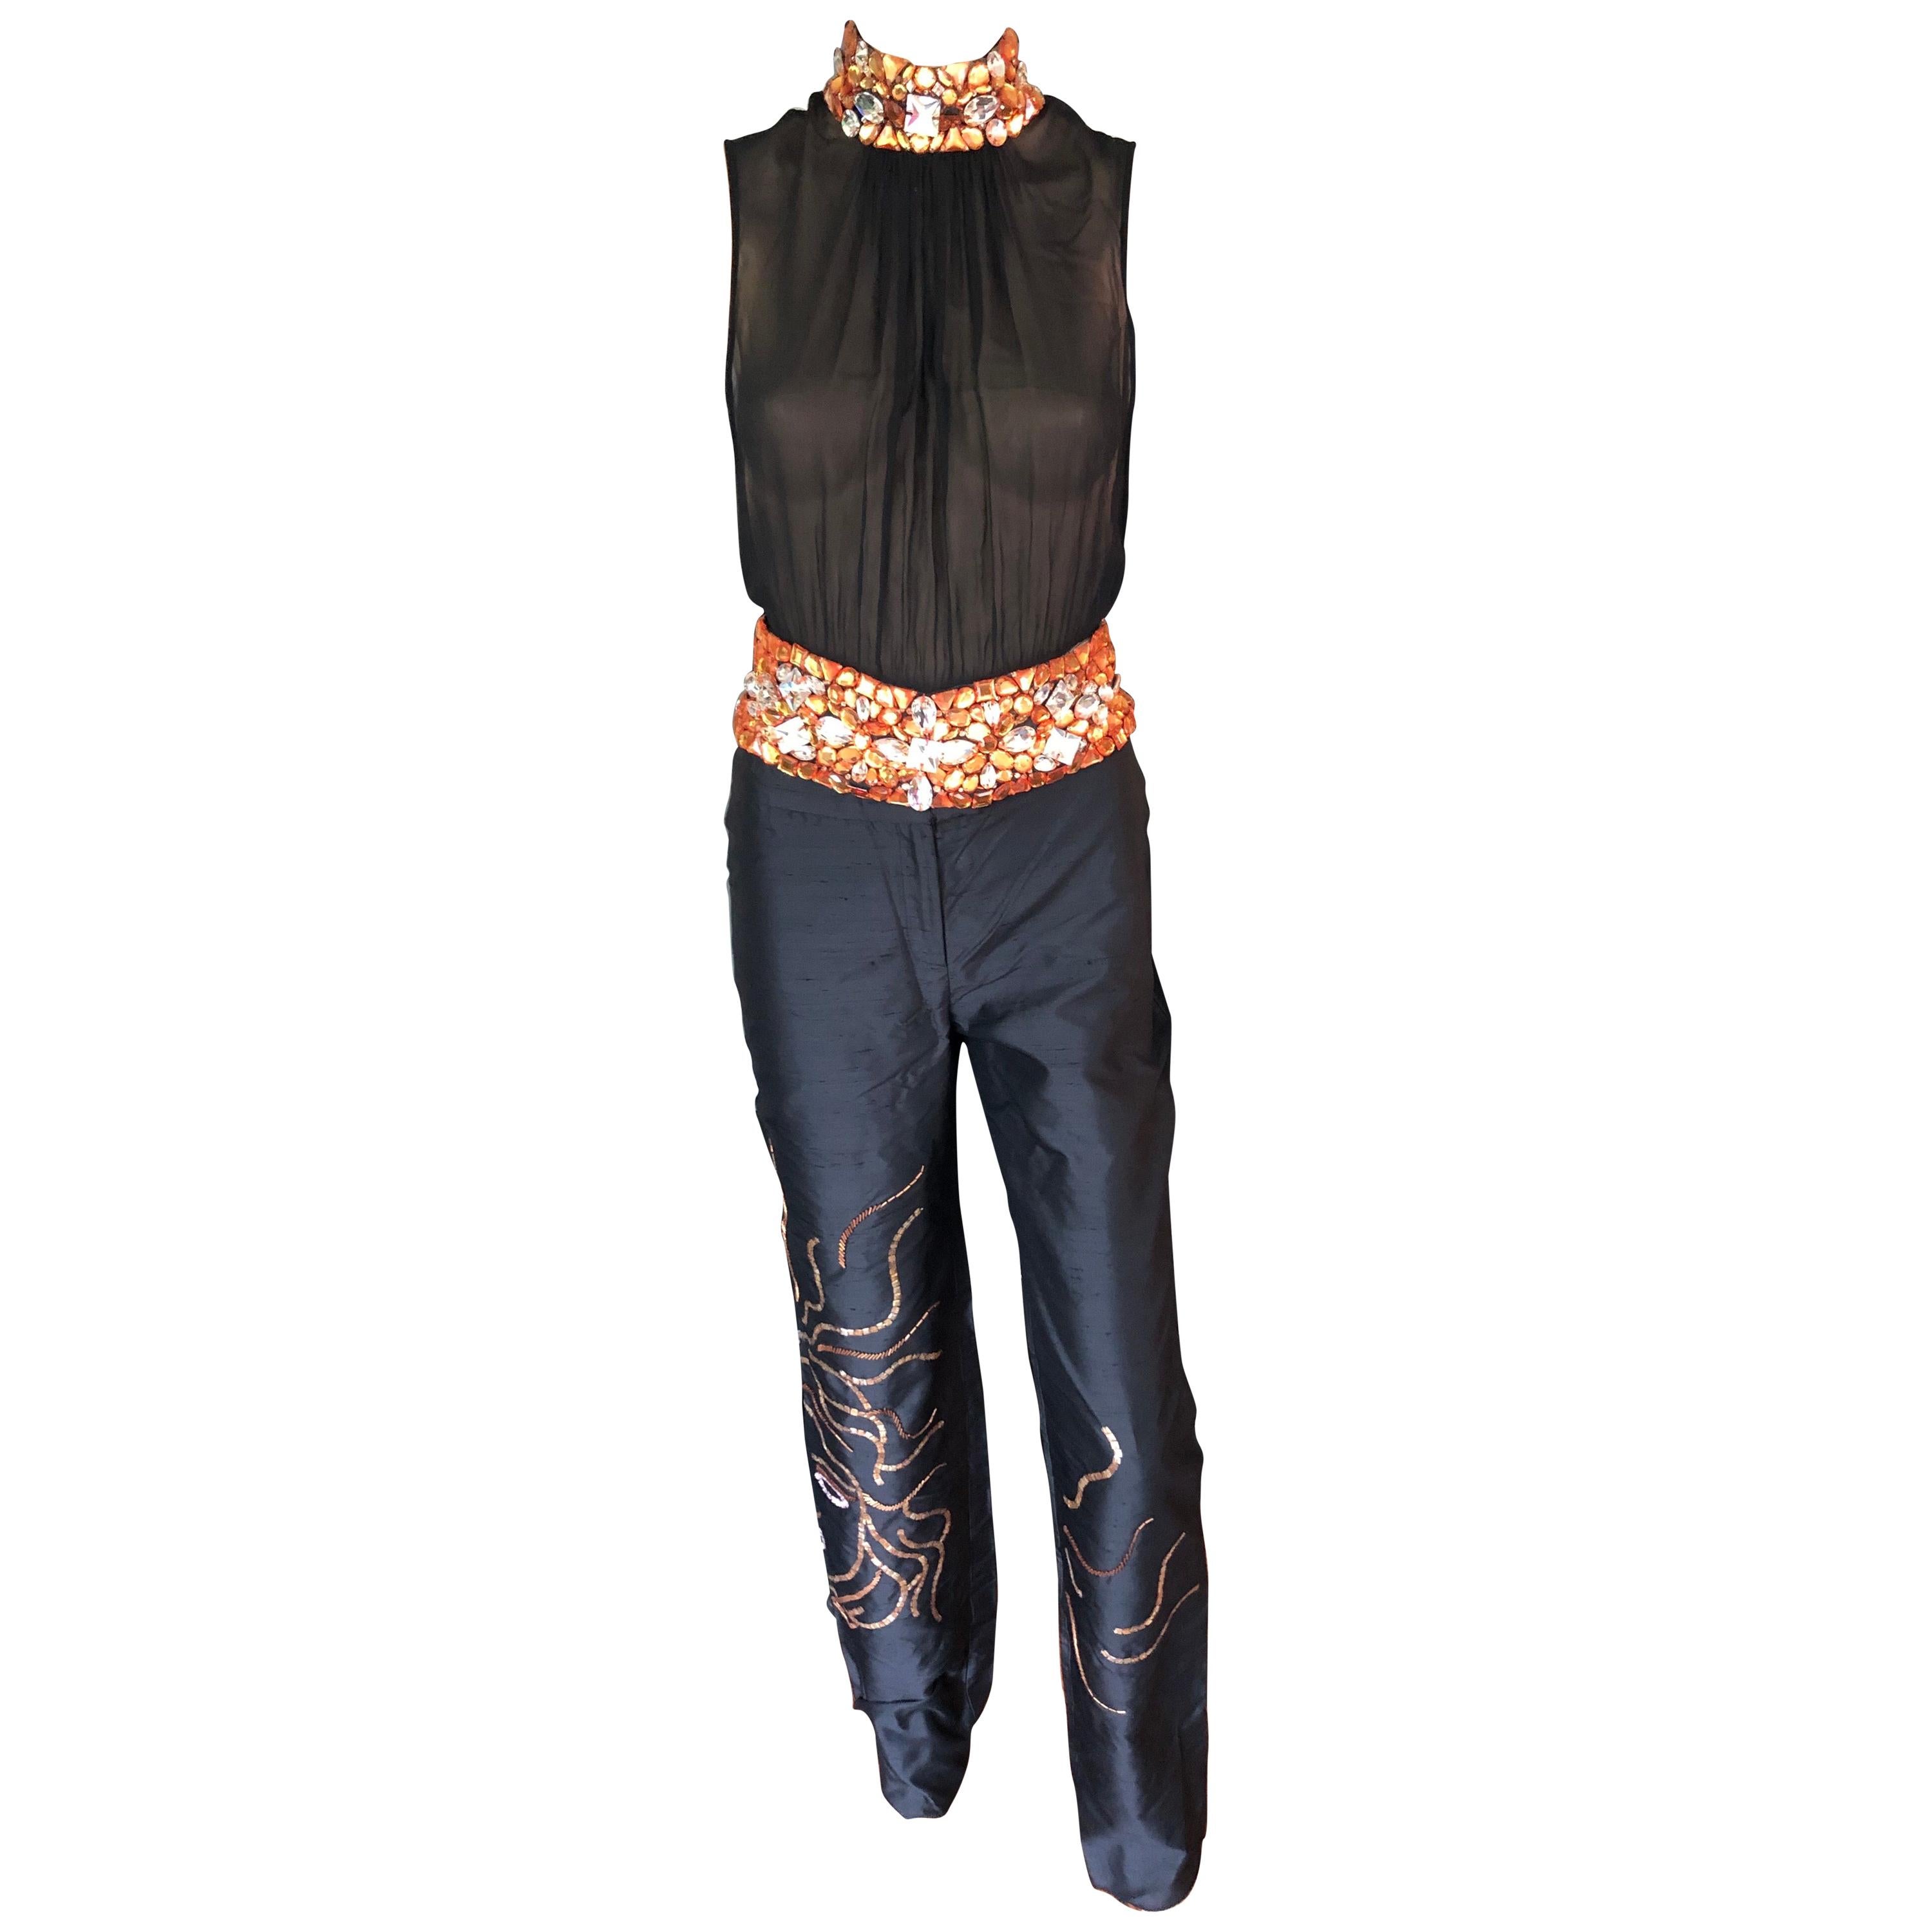 Gianni Versace Couture S/S 2000 Runway Embellished Sheer Top & Pants 2 Piece Set For Sale